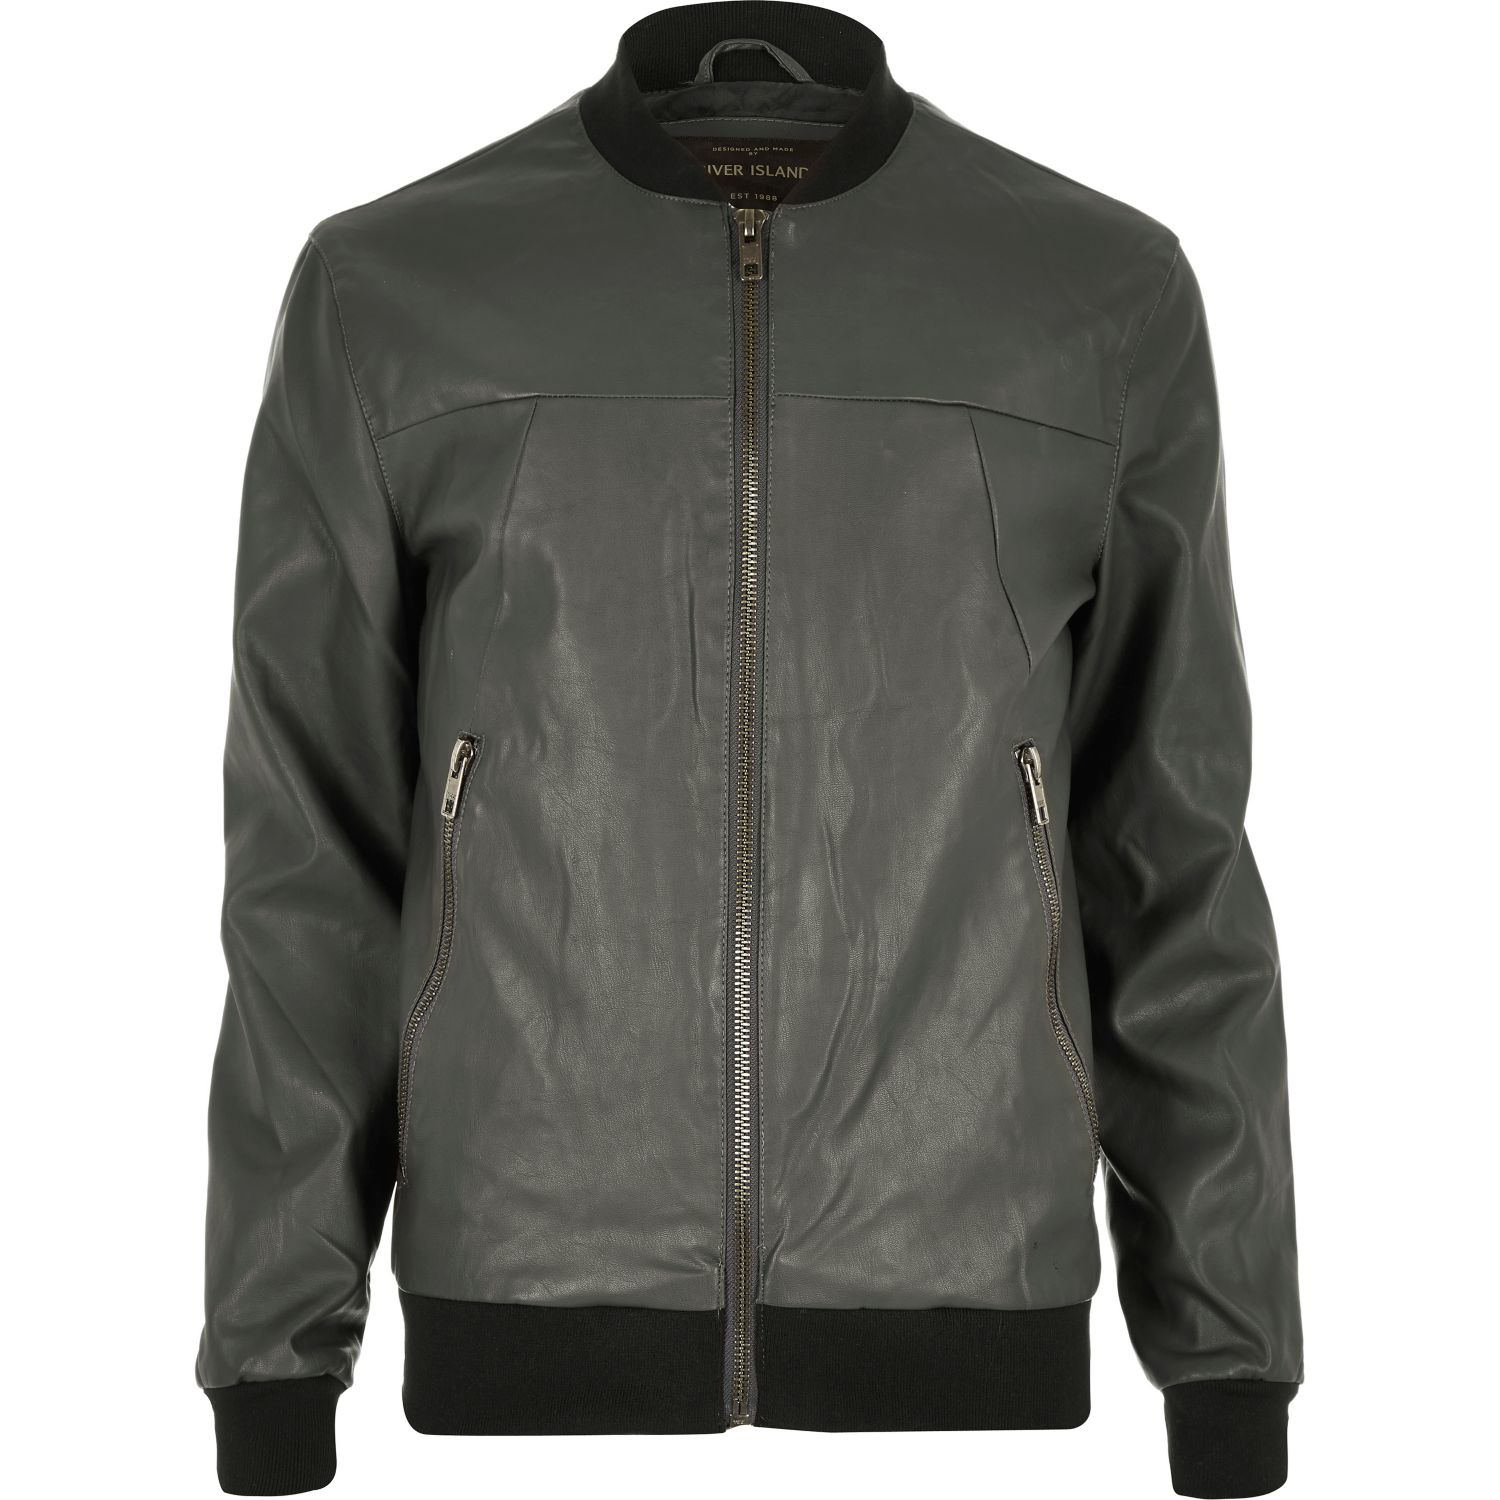 River island Grey Leather-look Bomber Jacket in Gray for Men (grey) | Lyst